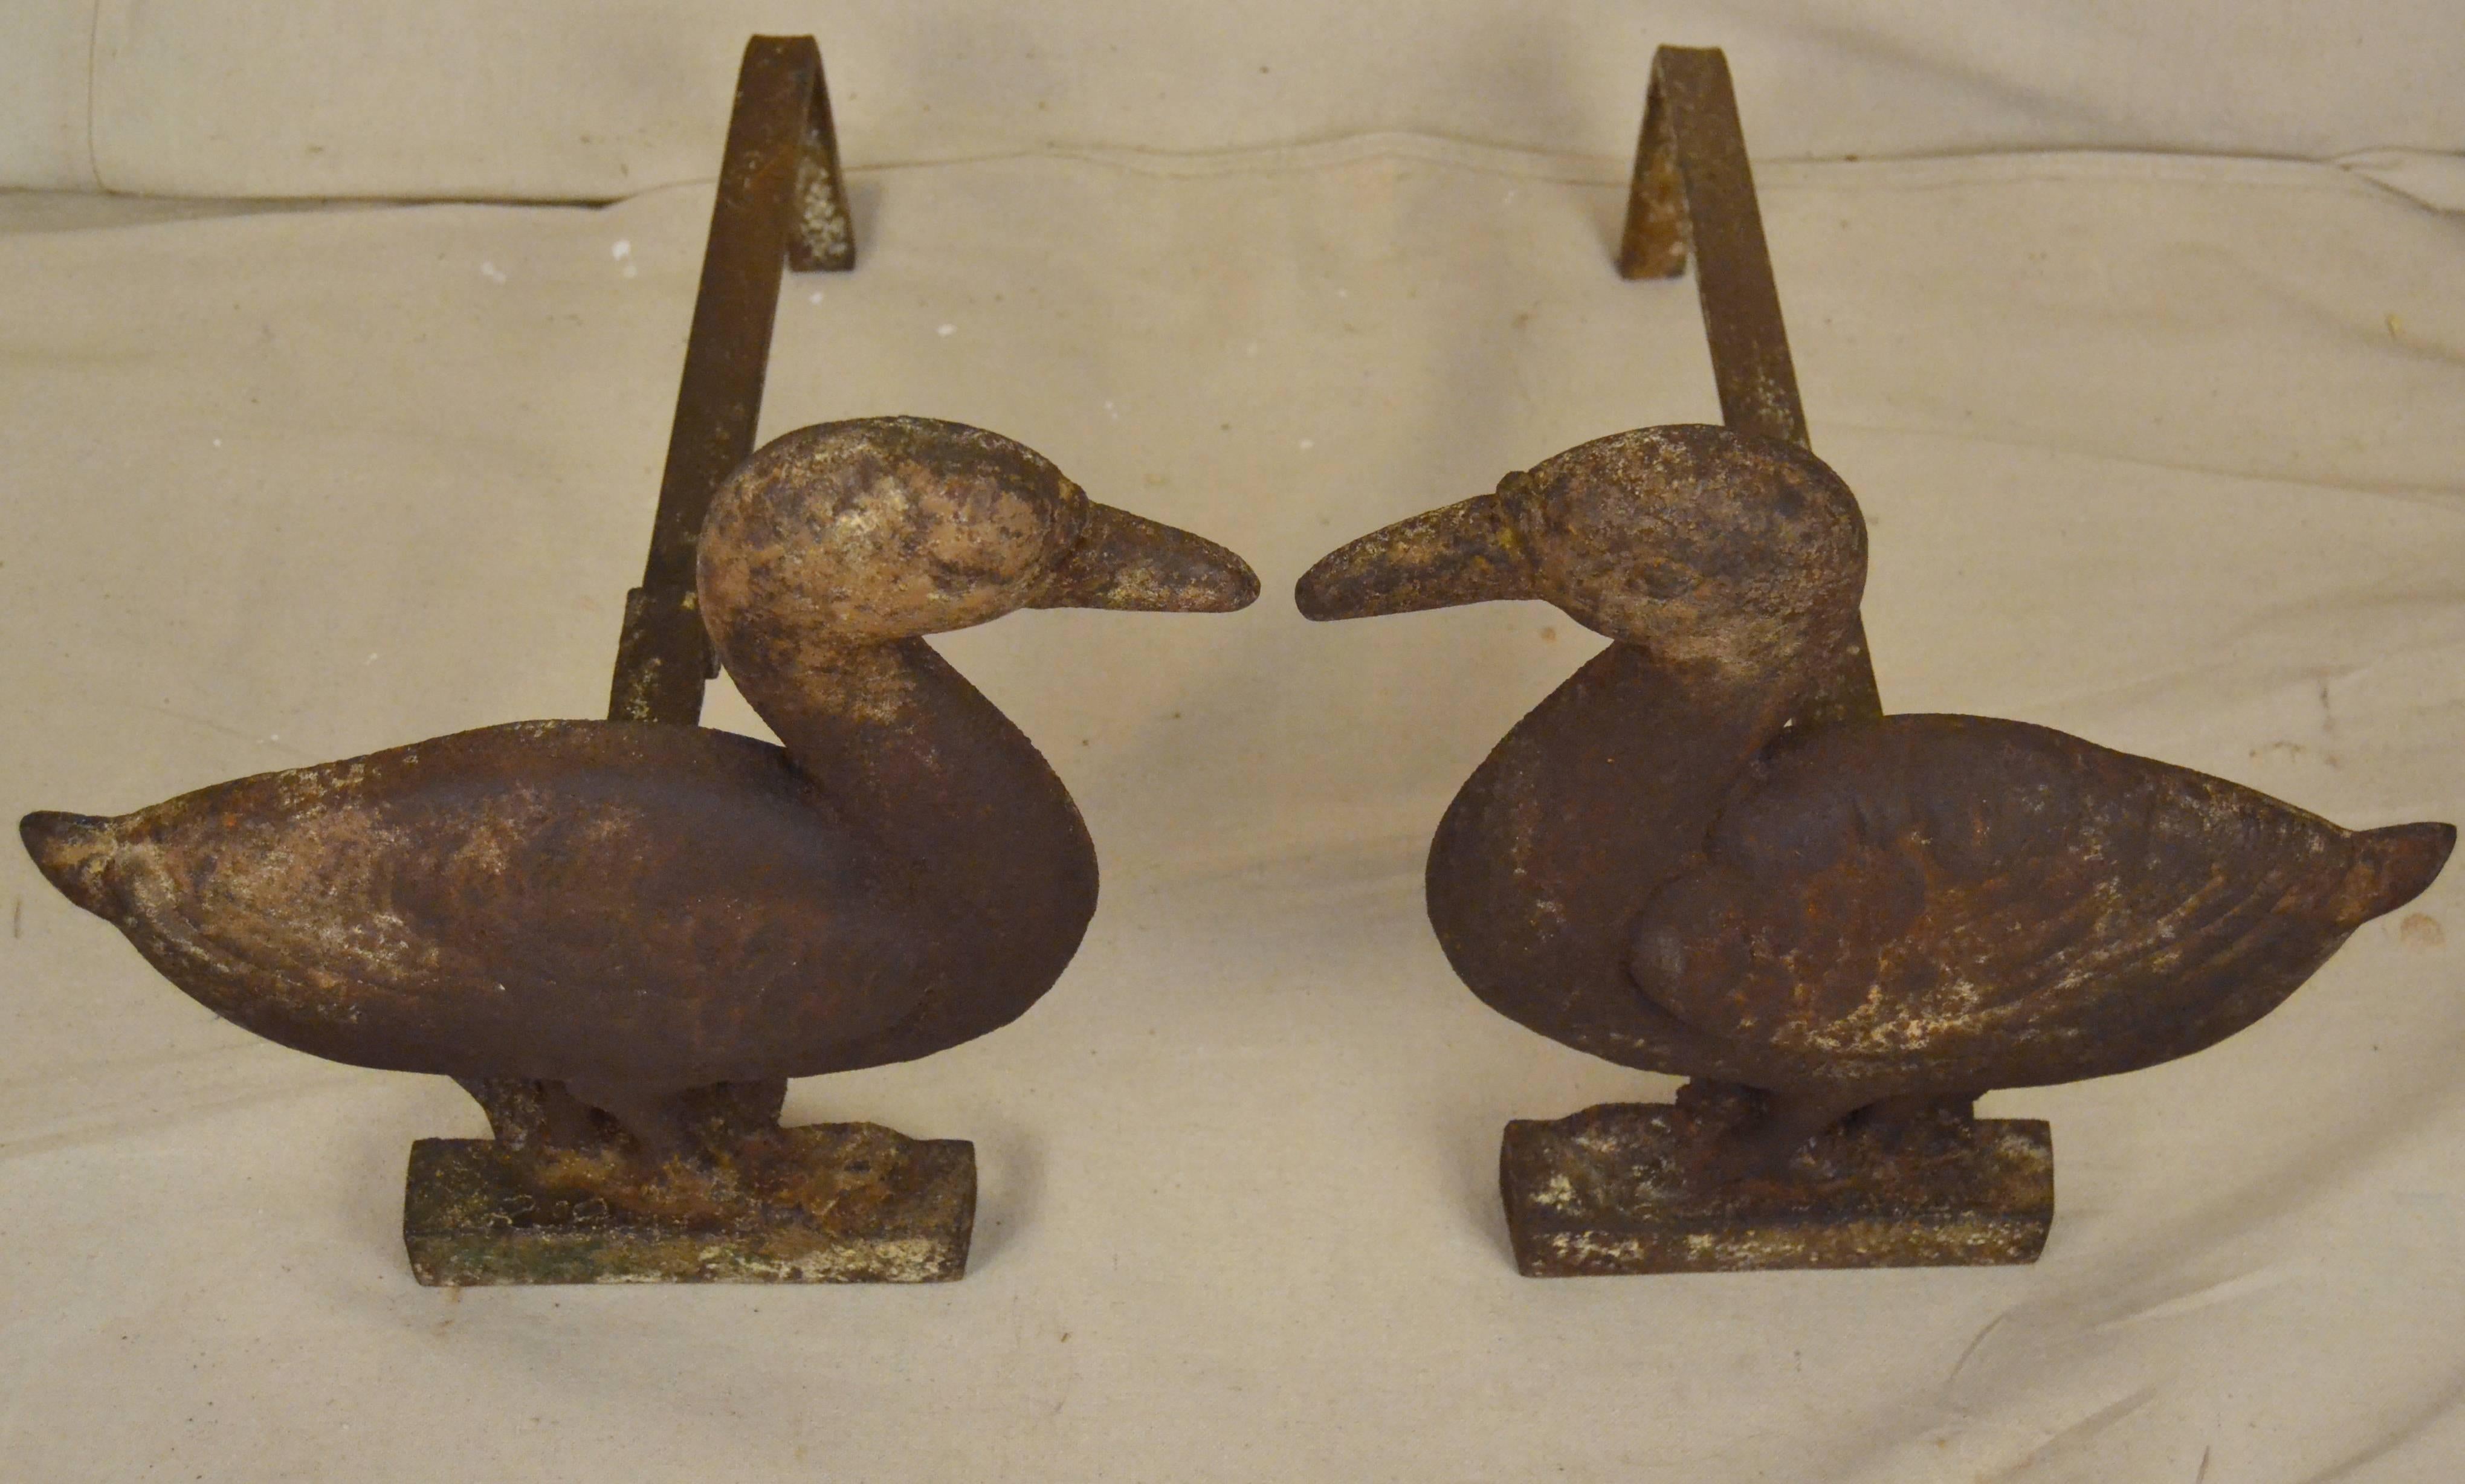 Cast iron andirons depicting a pair of feathered friends. Unusual and rare form we haven't encountered before. It's especially nice to have an opposing pair. Overall attractive rust with remnants of polychrome decoration, circa 1930.